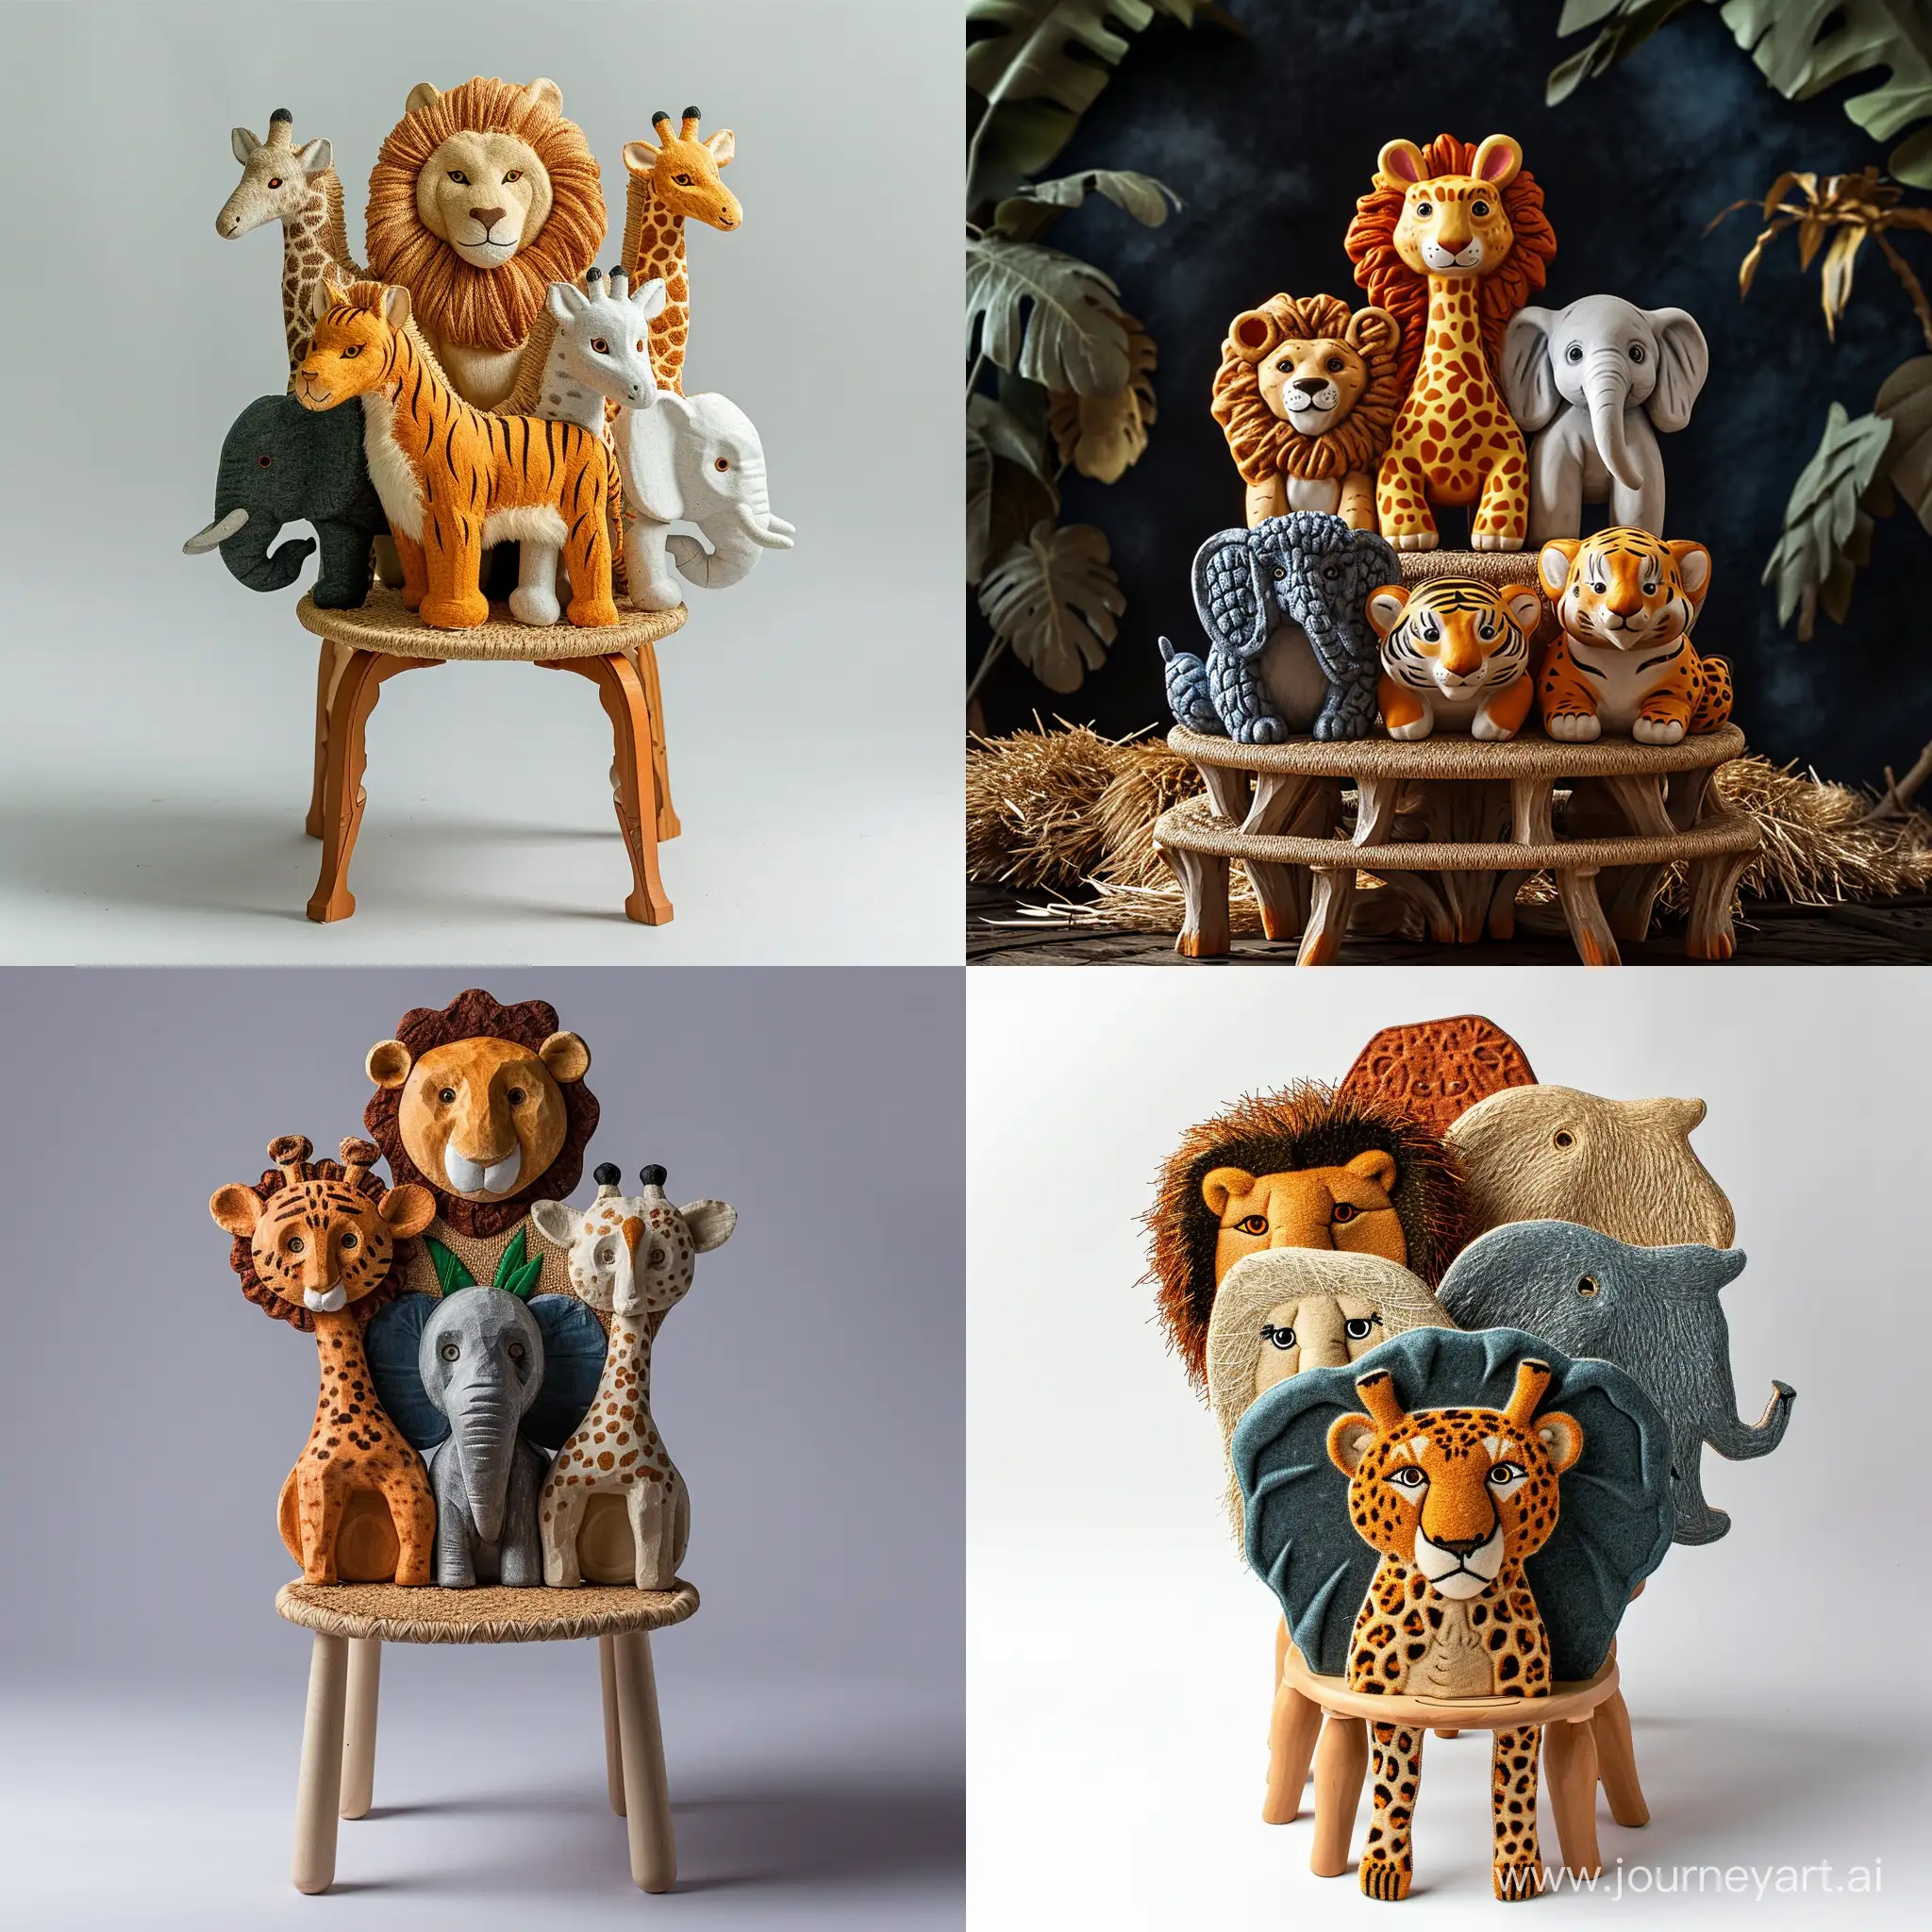 imagine an image of a  stackable sturdy children’s chair inspired by cute safari animals(lion, elephant, giraffe, tiger,cheetah), with backrests shaped like different creatures. Use recycled wood for the frame and woven plant fibers for seating areas, depicted in colors representative of the chosen animals. The seat should stand approximately 30cm tall, built to educate about wildlife and ensure durability.realistic style